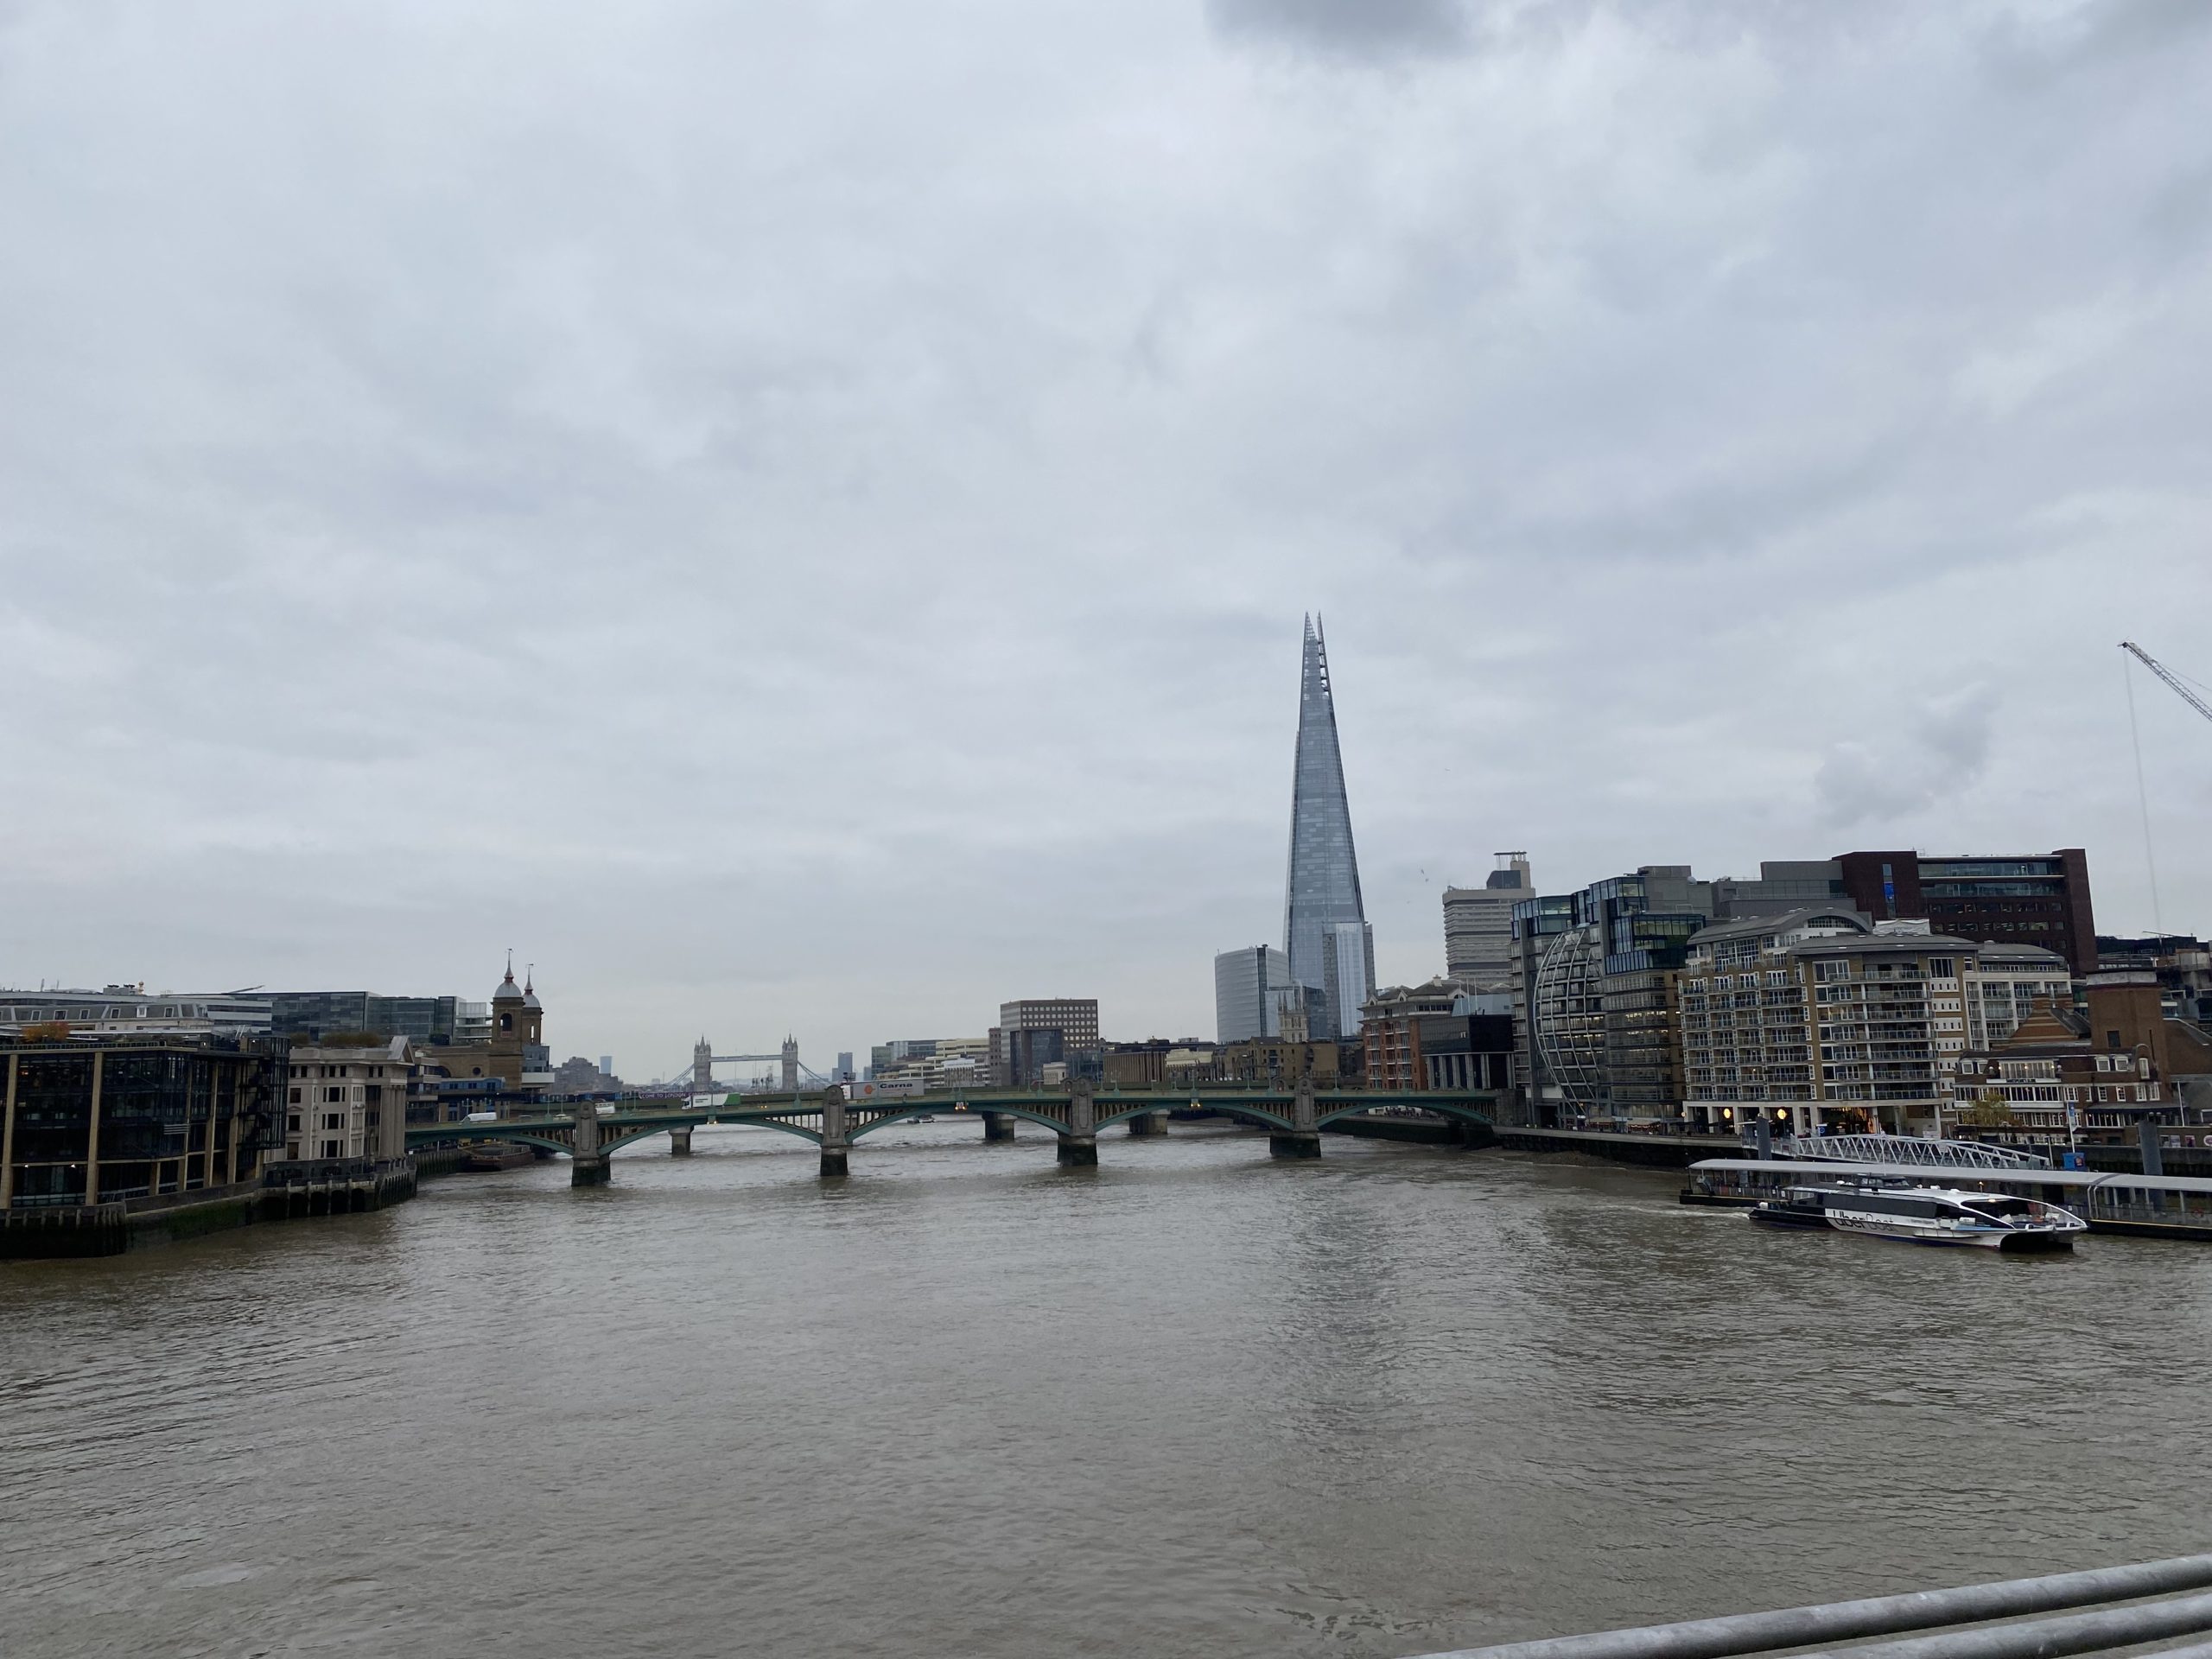 Looking east on the Thames